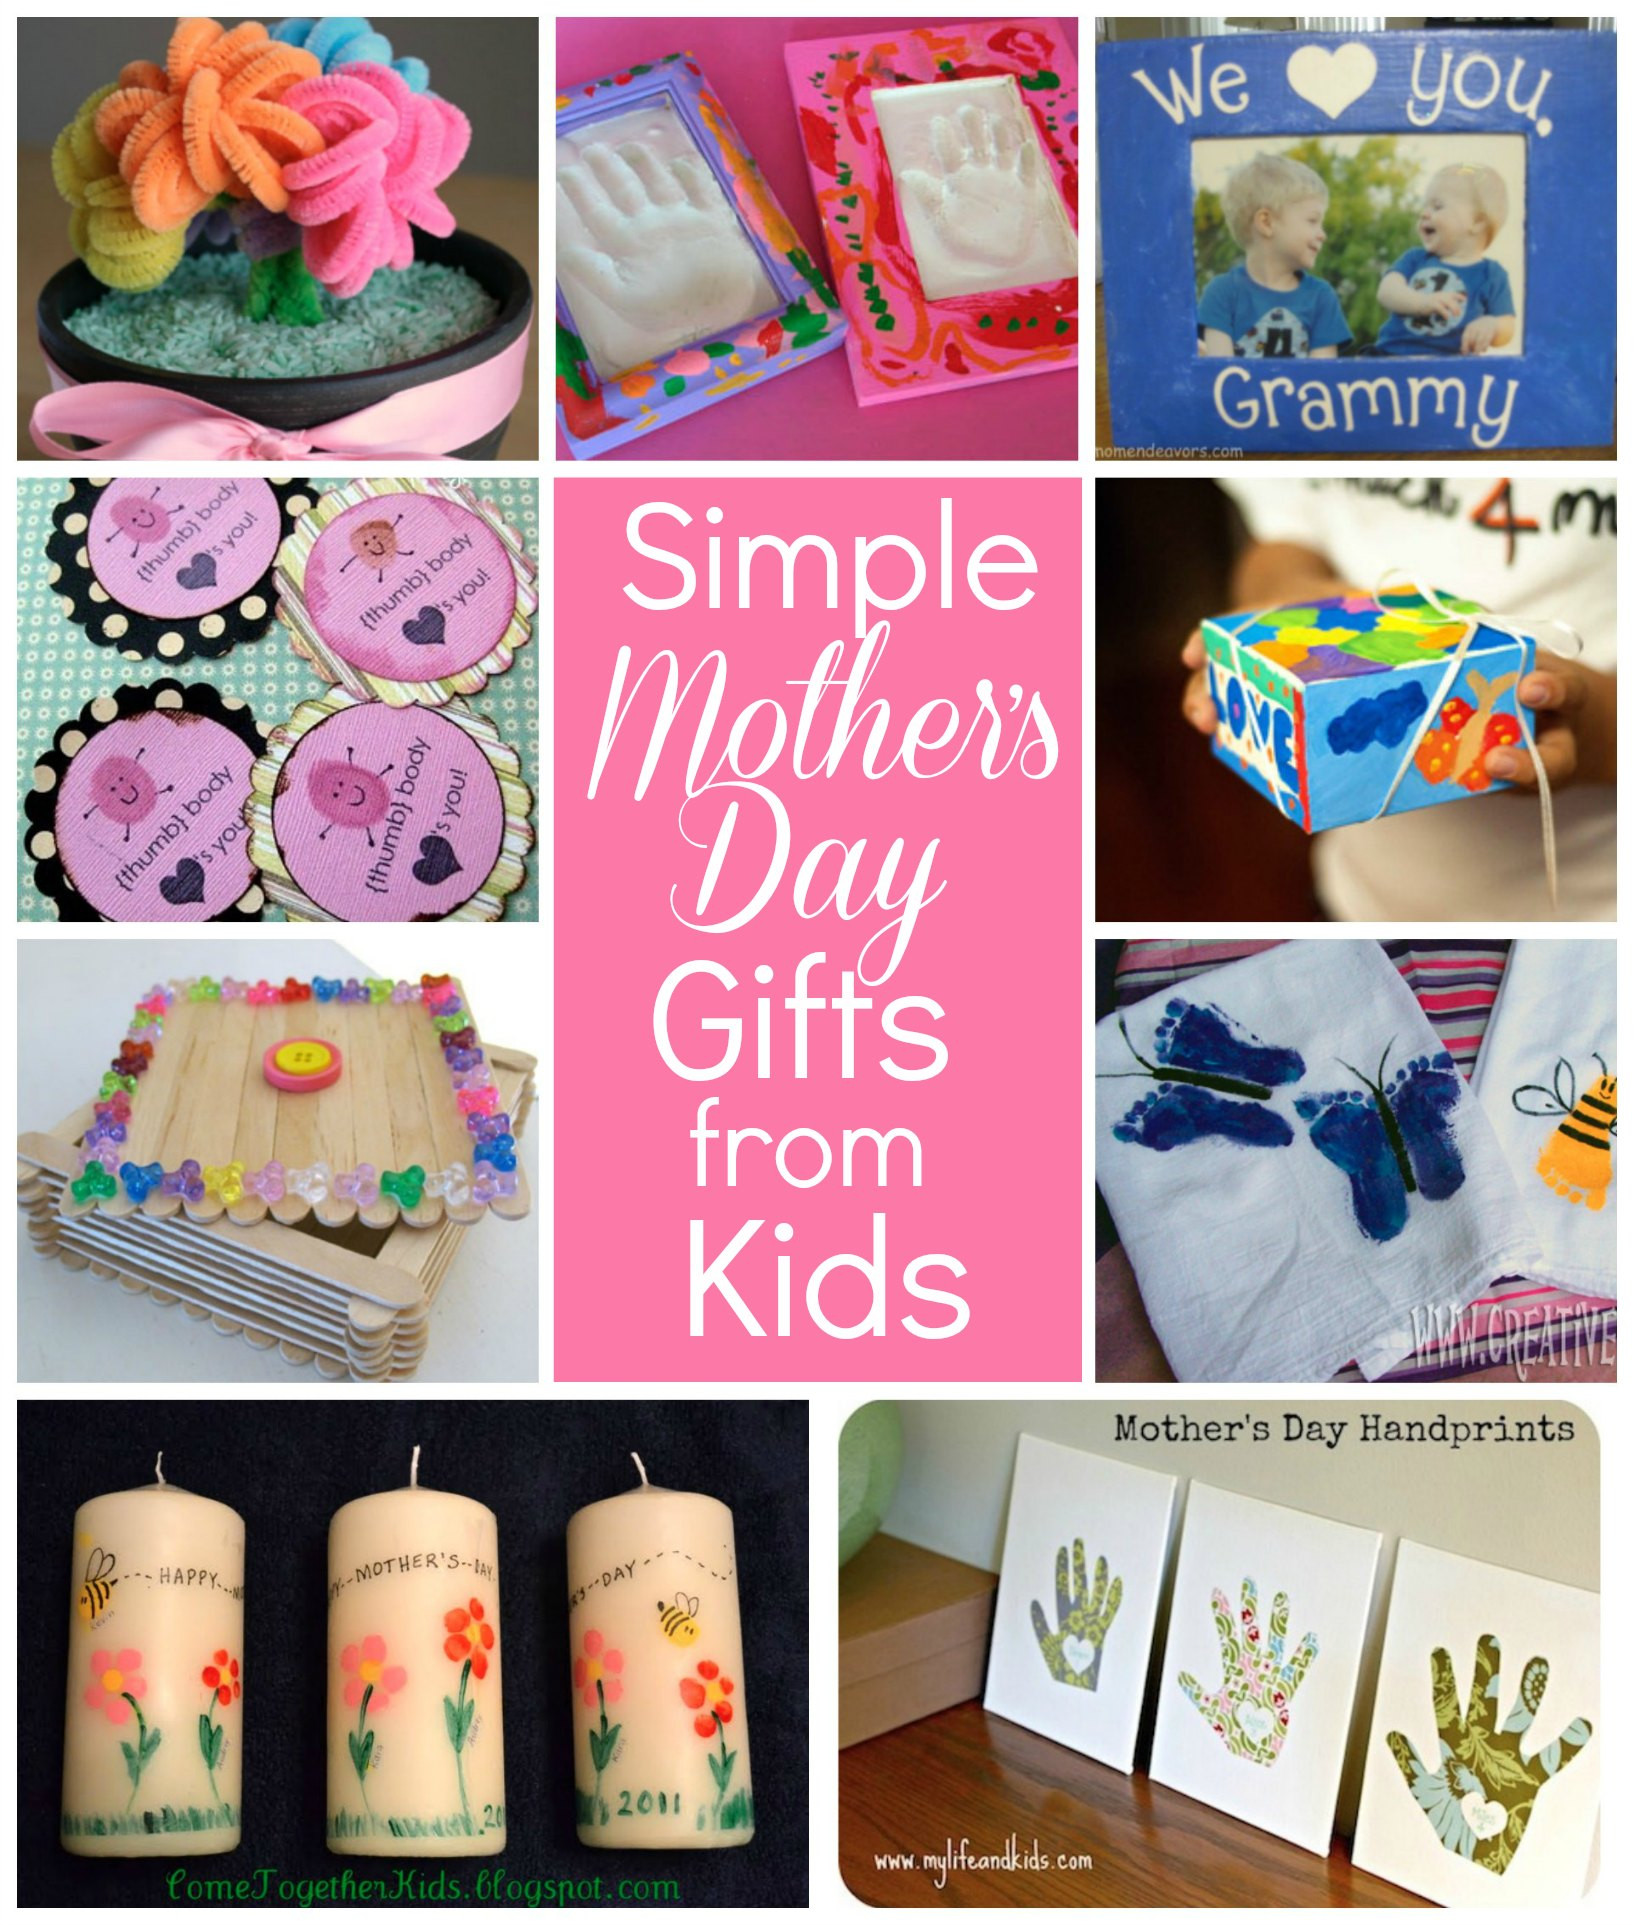 Creative Mothers Day Gift Ideas
 Simple Mother’s Day t ideas for grandma Flower pot